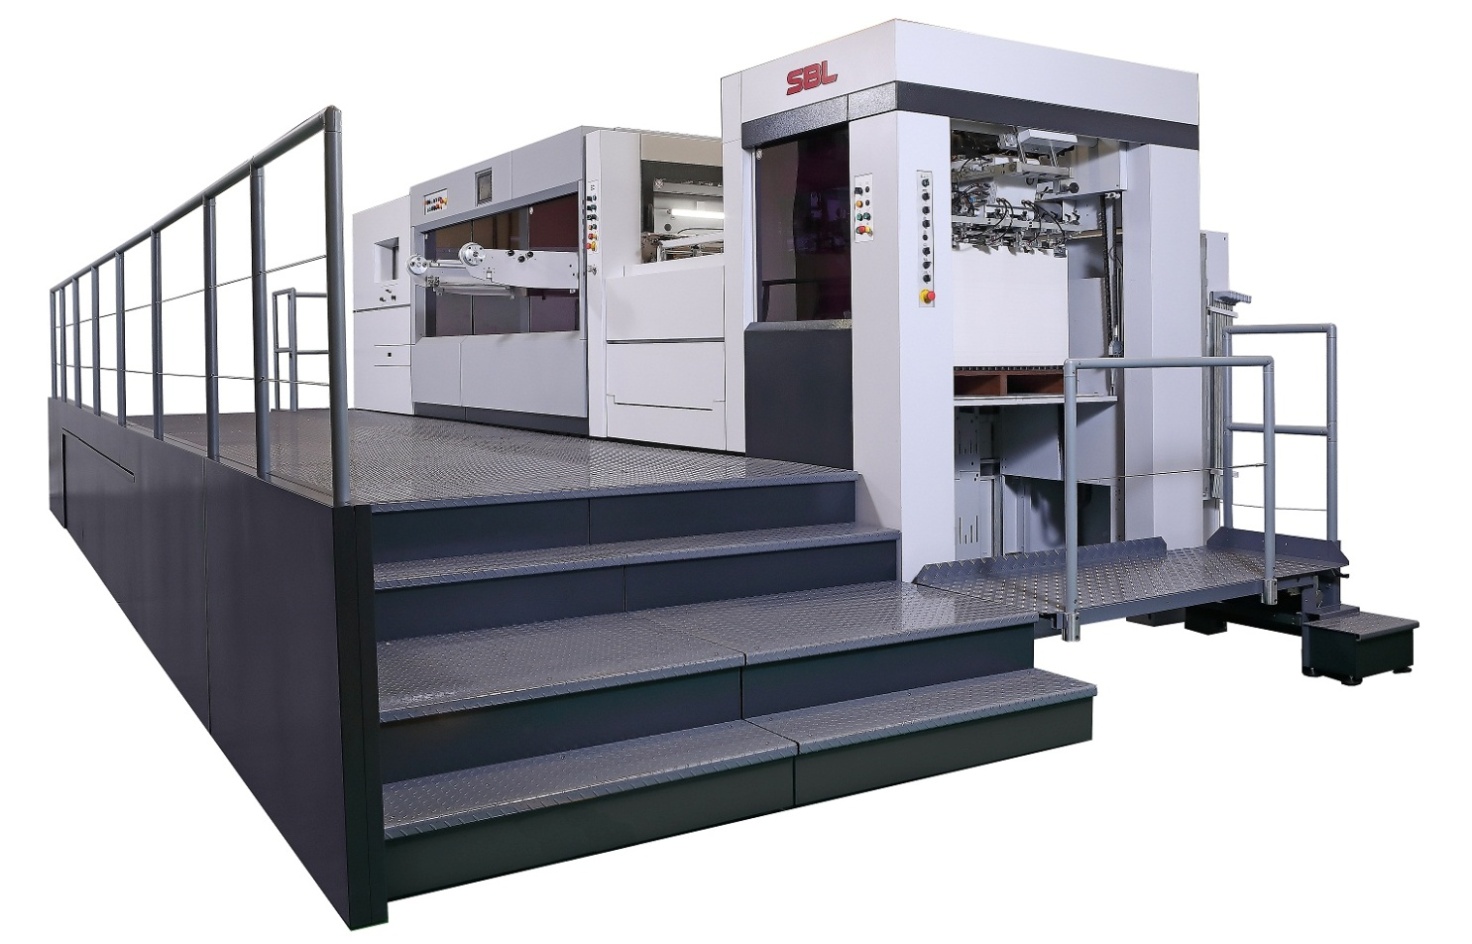 Automatic Diecutting and Creasing Platen with Stripping and Blanking / SBL MACHINERY CO., LTD.